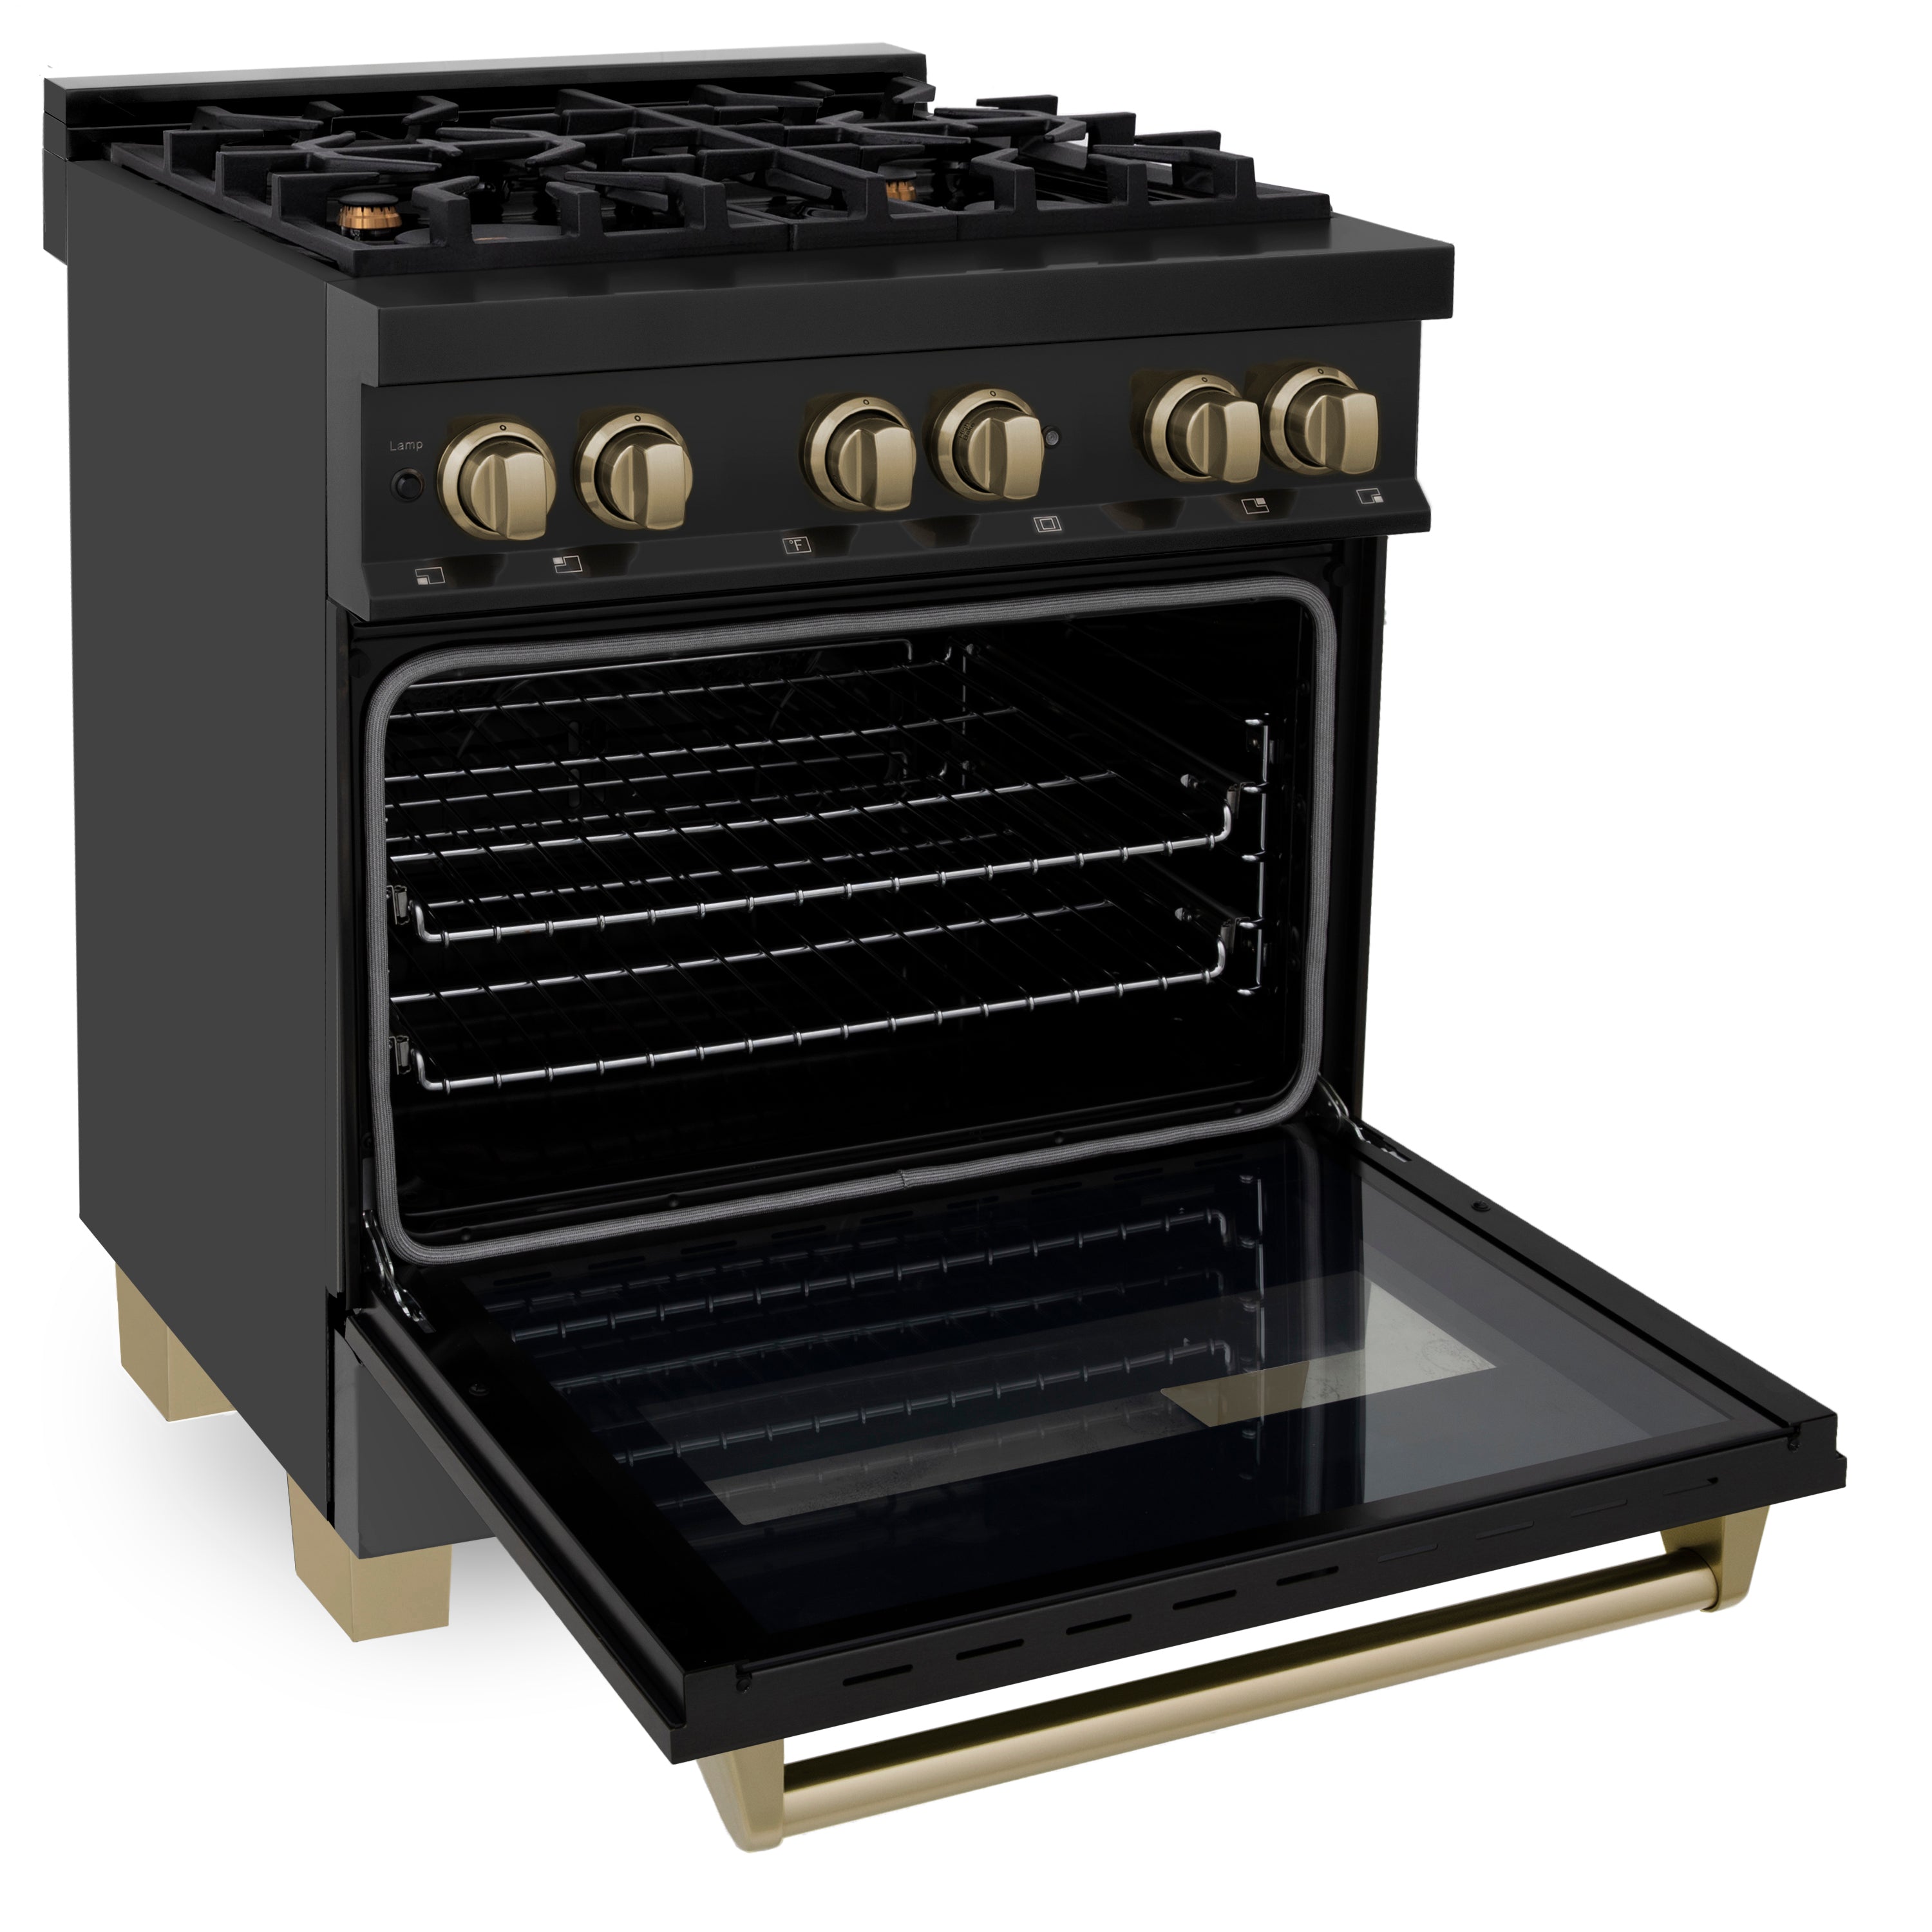 ZLINE Autograph Edition 30" 4.0 cu. ft. Dual Fuel Range with Gas Stove and Electric Oven in Black Stainless Steel with Champagne Bronze Accents (RABZ-30-CB)